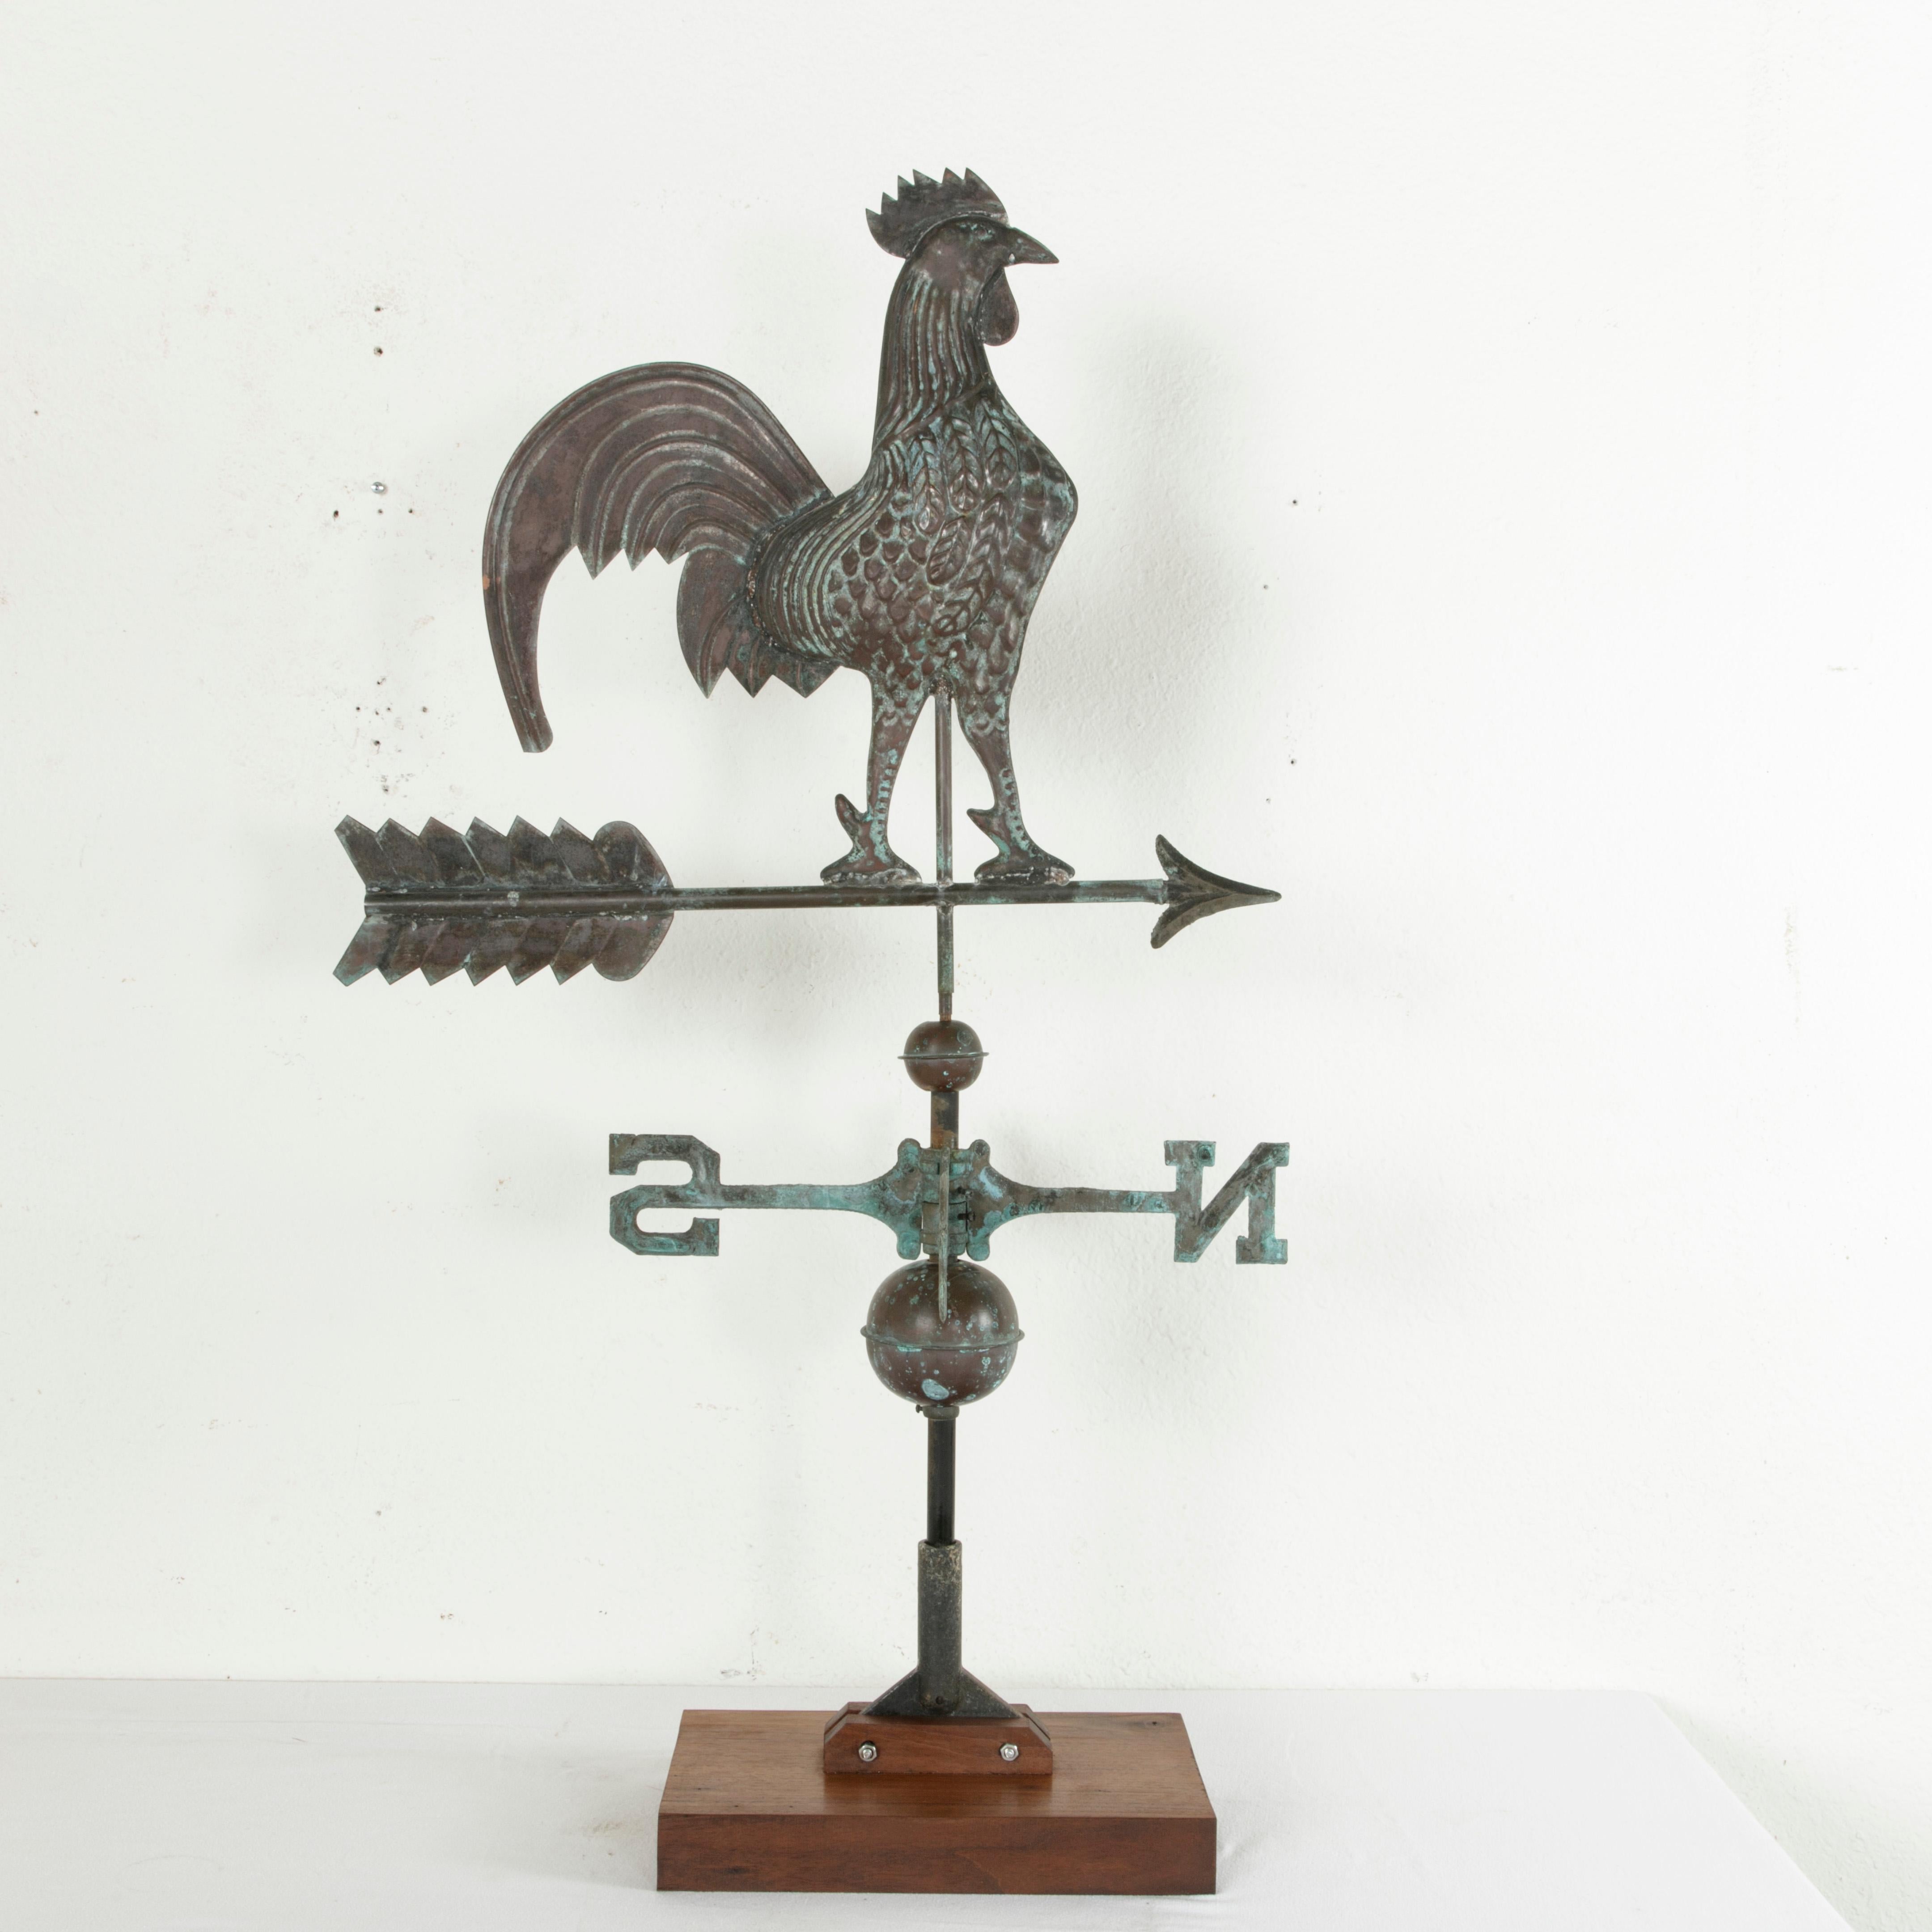 Found in France, this early 20th century patinated copper weather vane features a rooster perched on top of an arrow. Below are arms with the letters NESW indicating the cardinal directions in English. A spinning ball is above and below the arms.